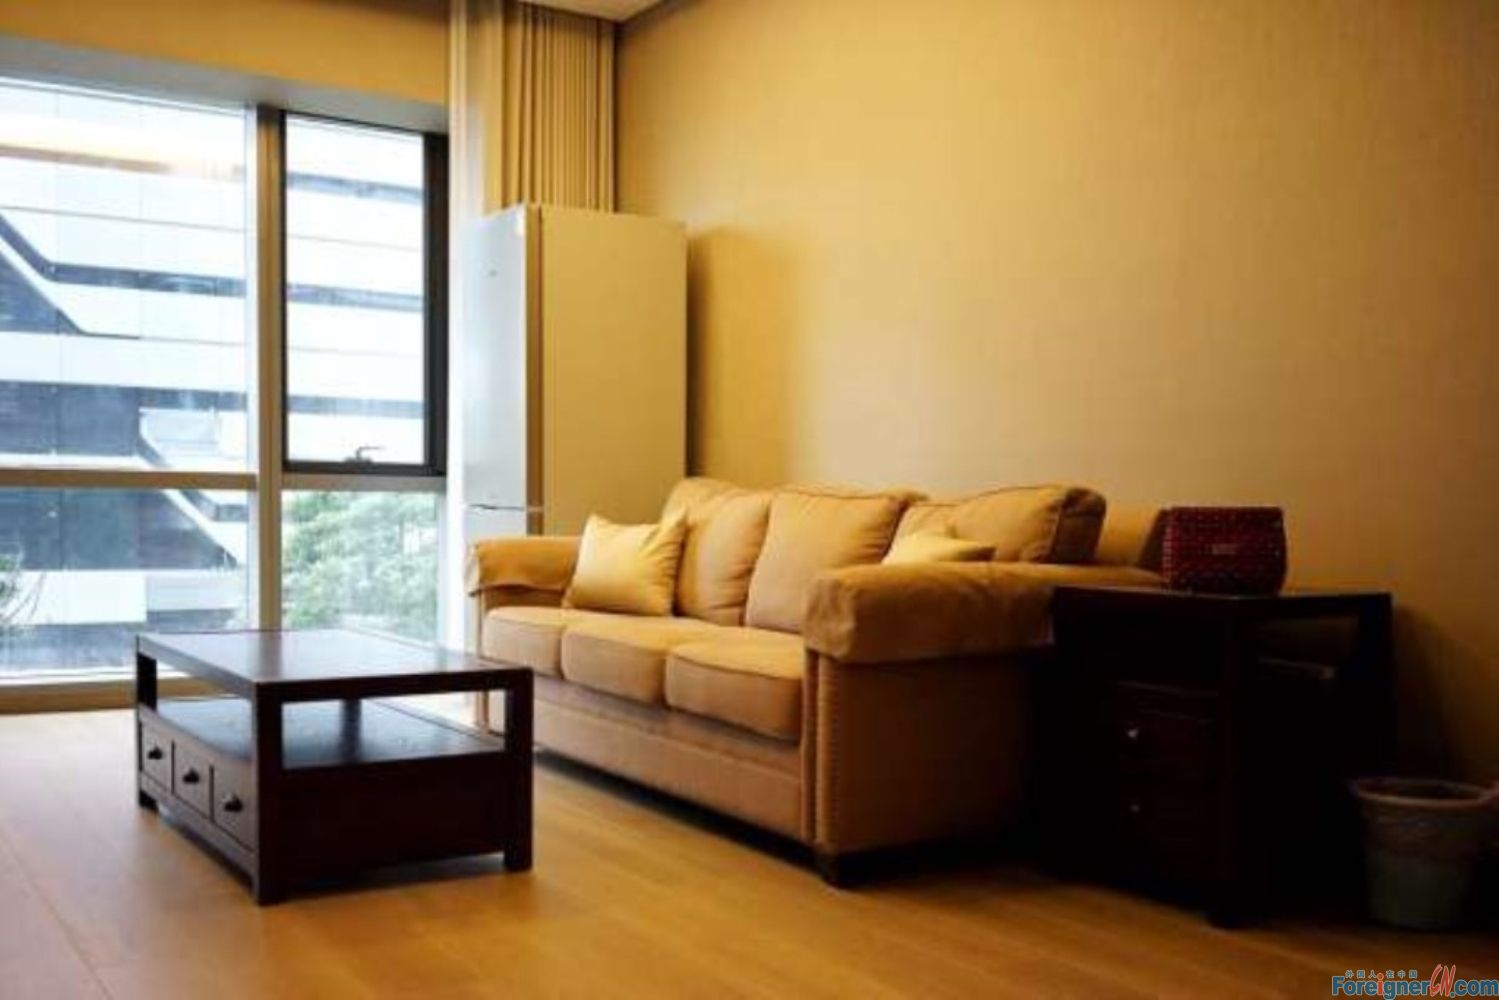 Luxurious!!! HLCC Apartment rent in suzhou /2 rooms and 1 bathroom/ furnished,central AC/ floor heating/ built-in oven  /SIP/Times Square